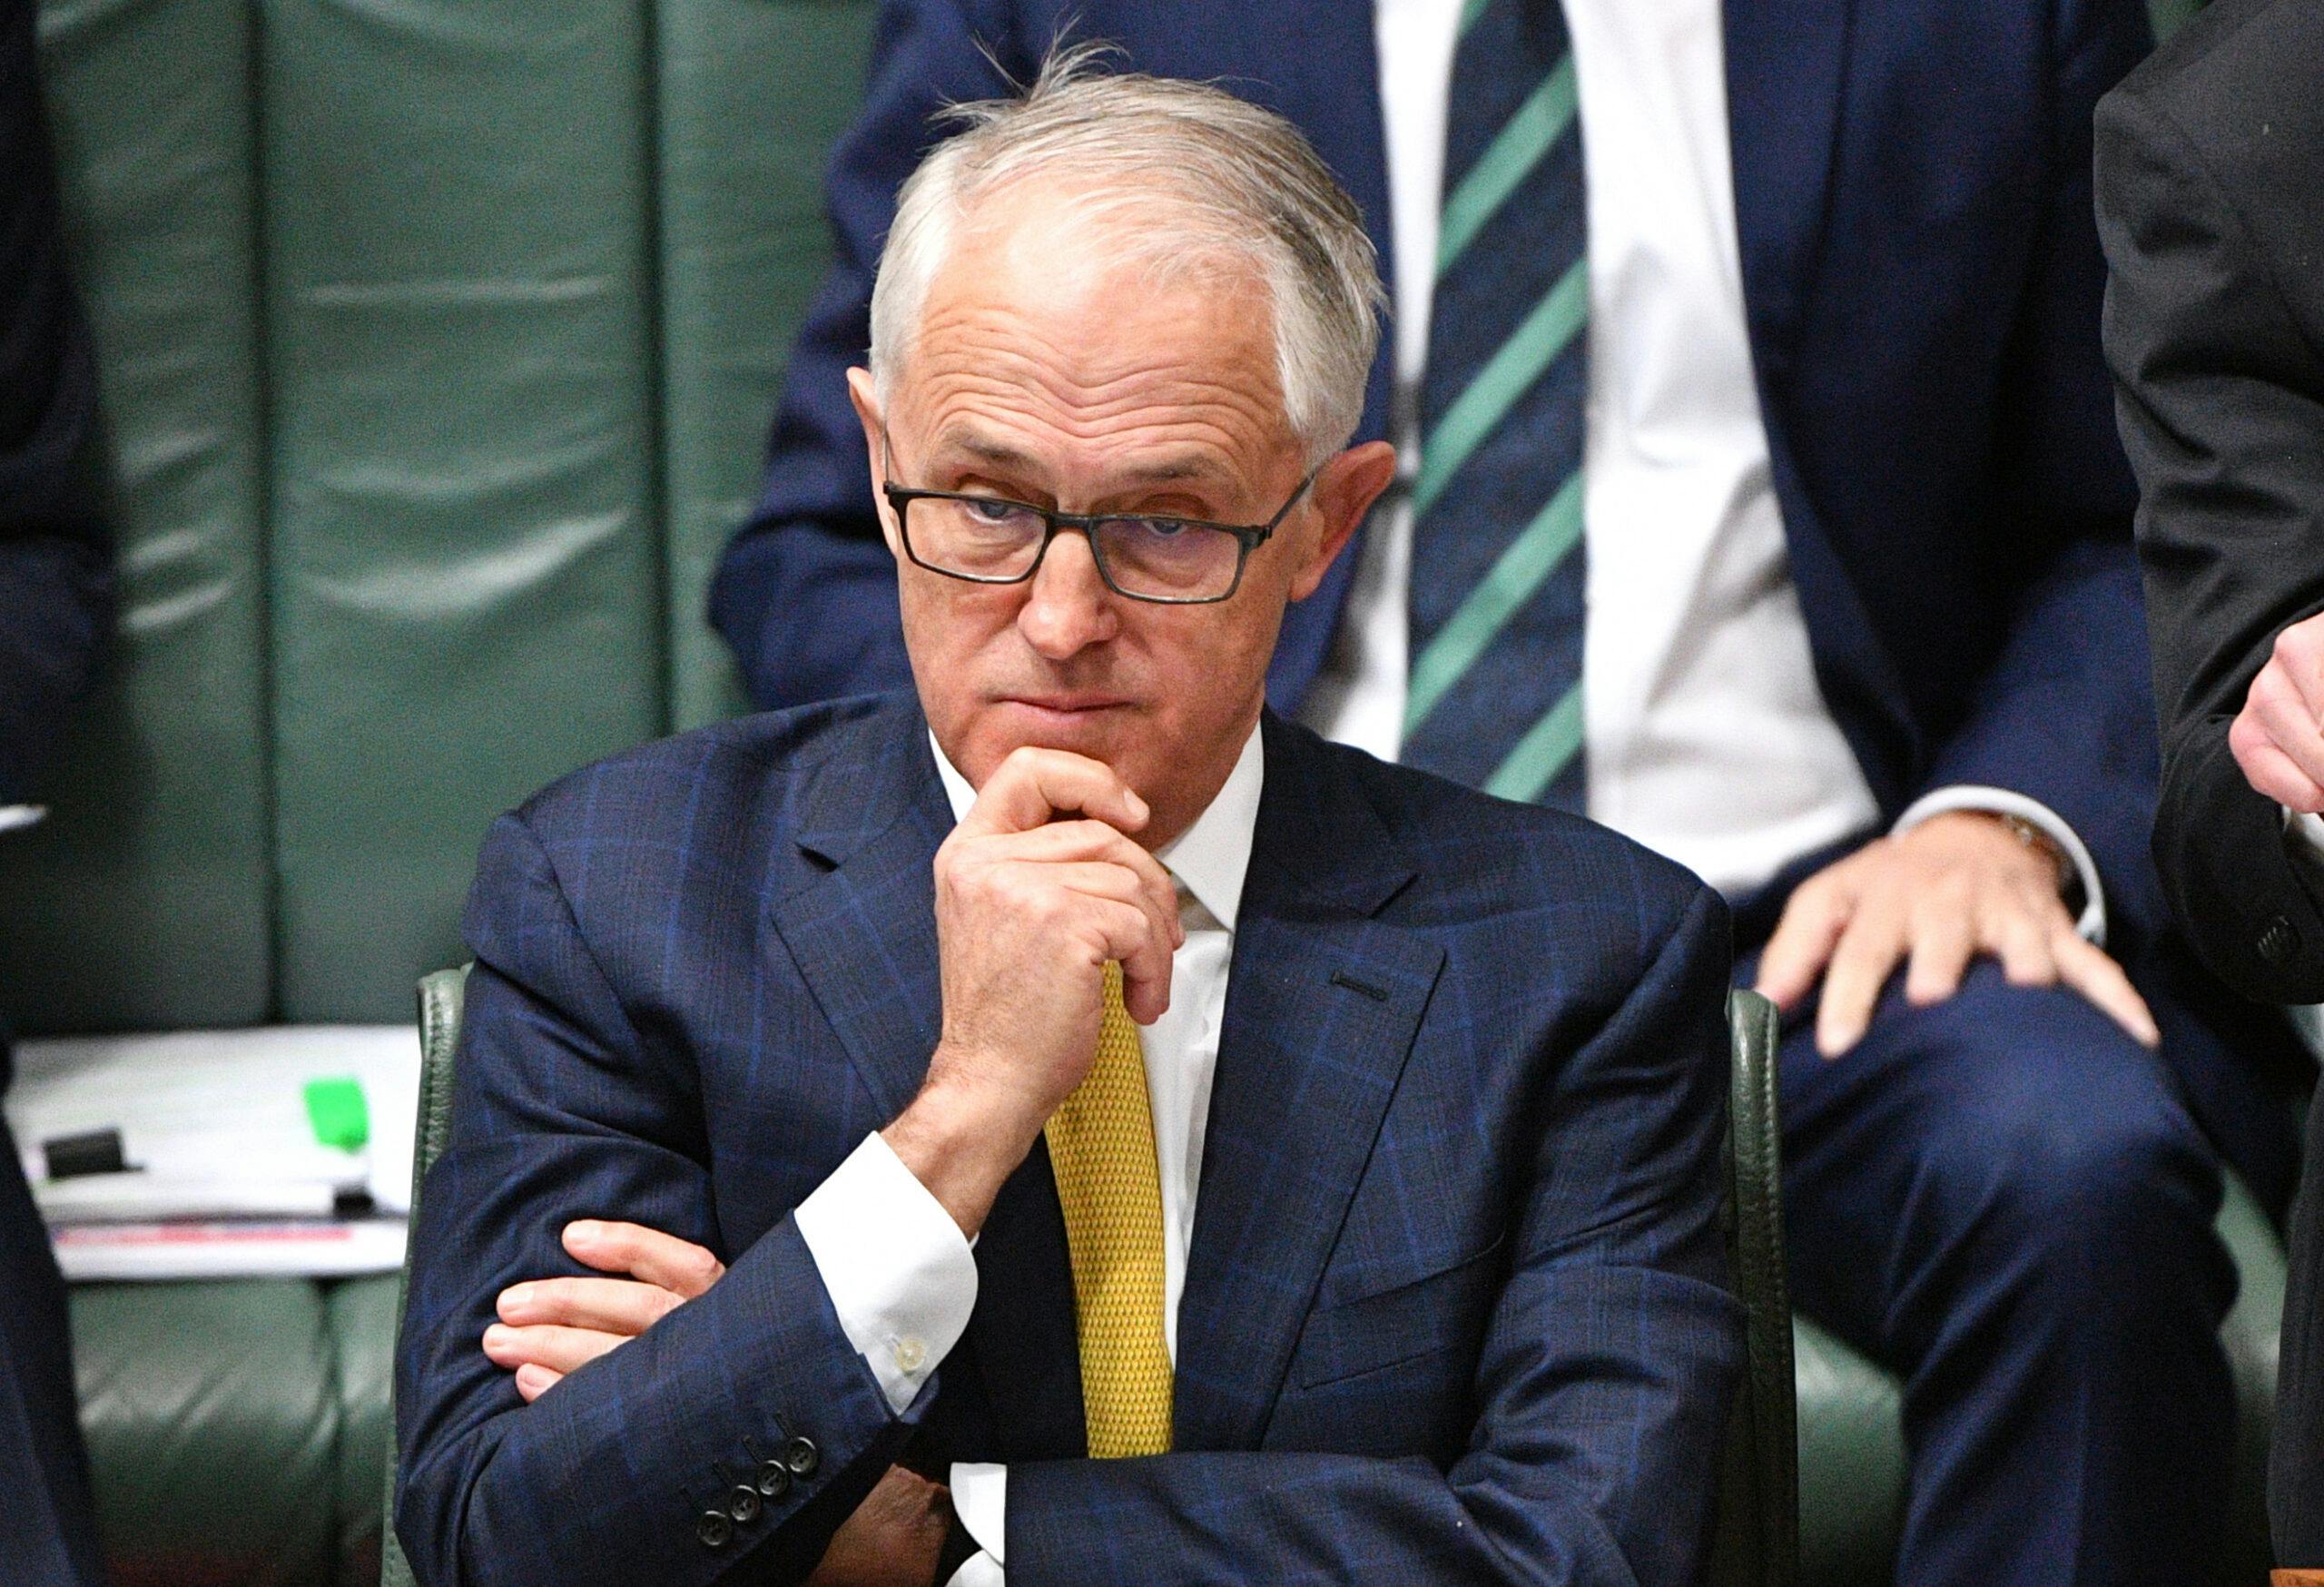 Australians React With Fatalistic Humour Toward The #Libspill